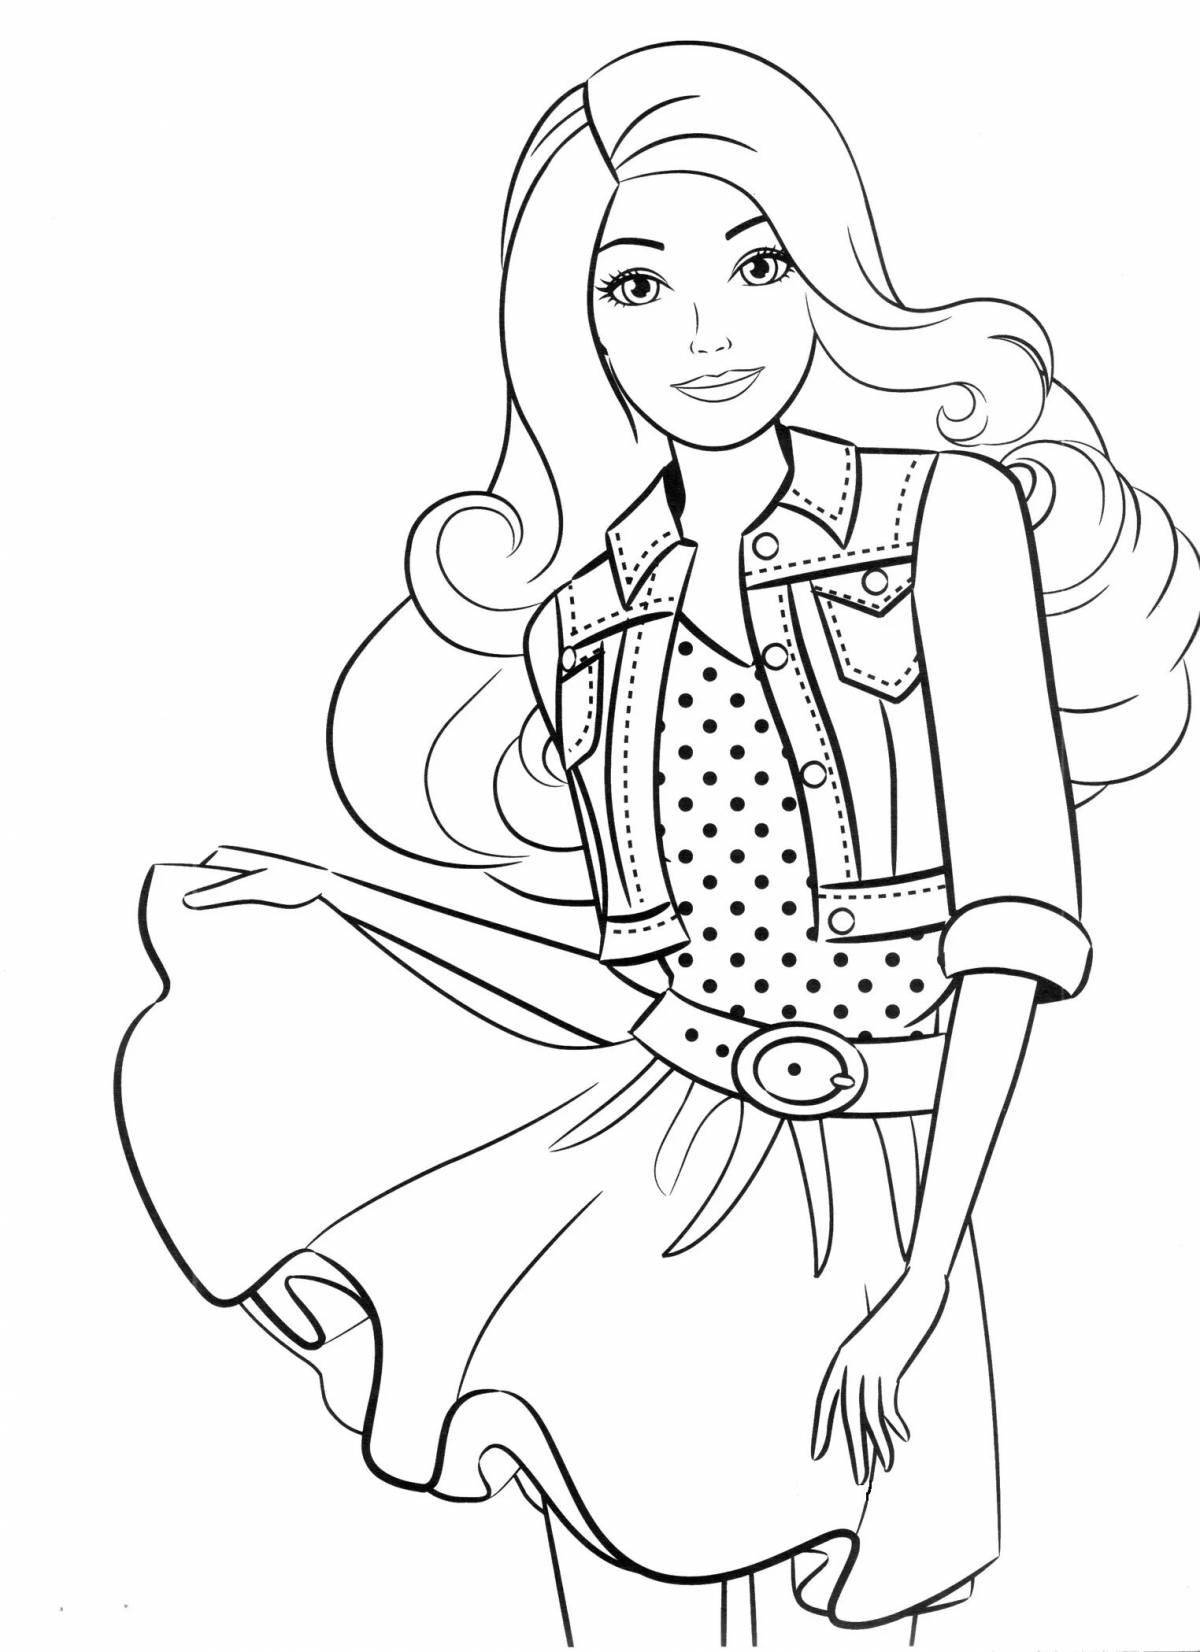 Adorable coloring pages for girls, fashion, beautiful